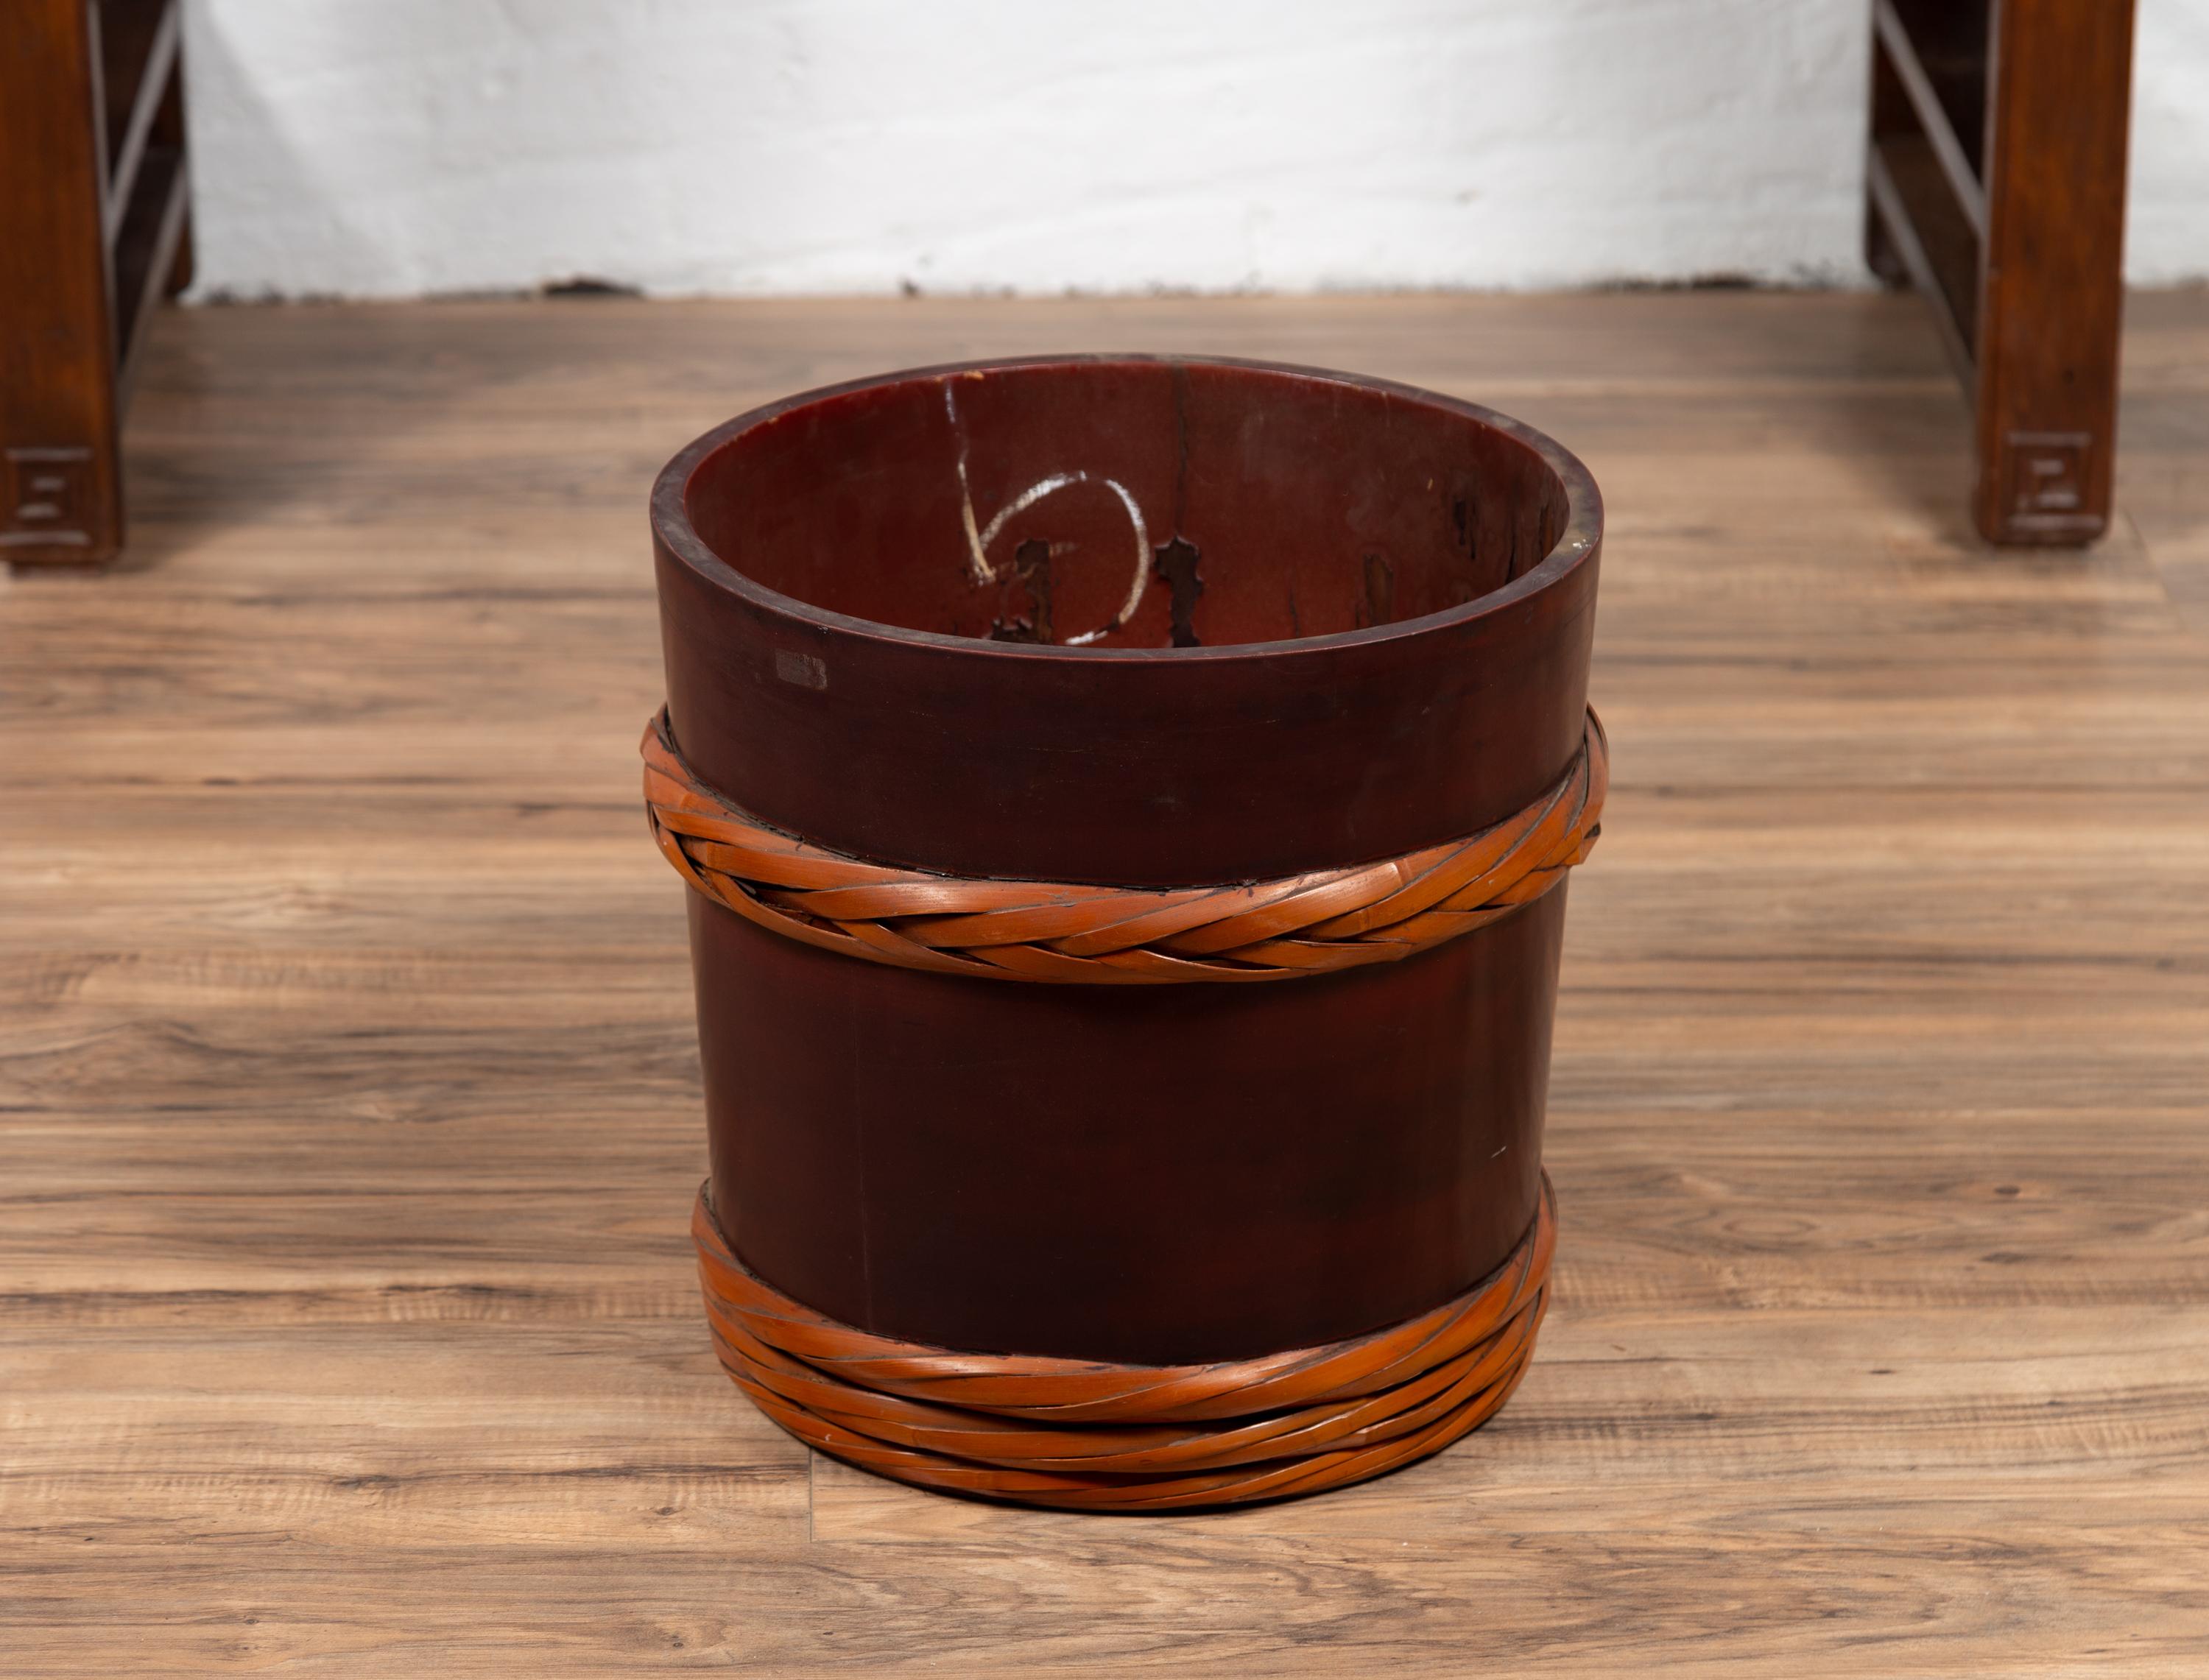 Vintage Chinese Wooden Barrel Planter with Rope Design with Red Undertone 1